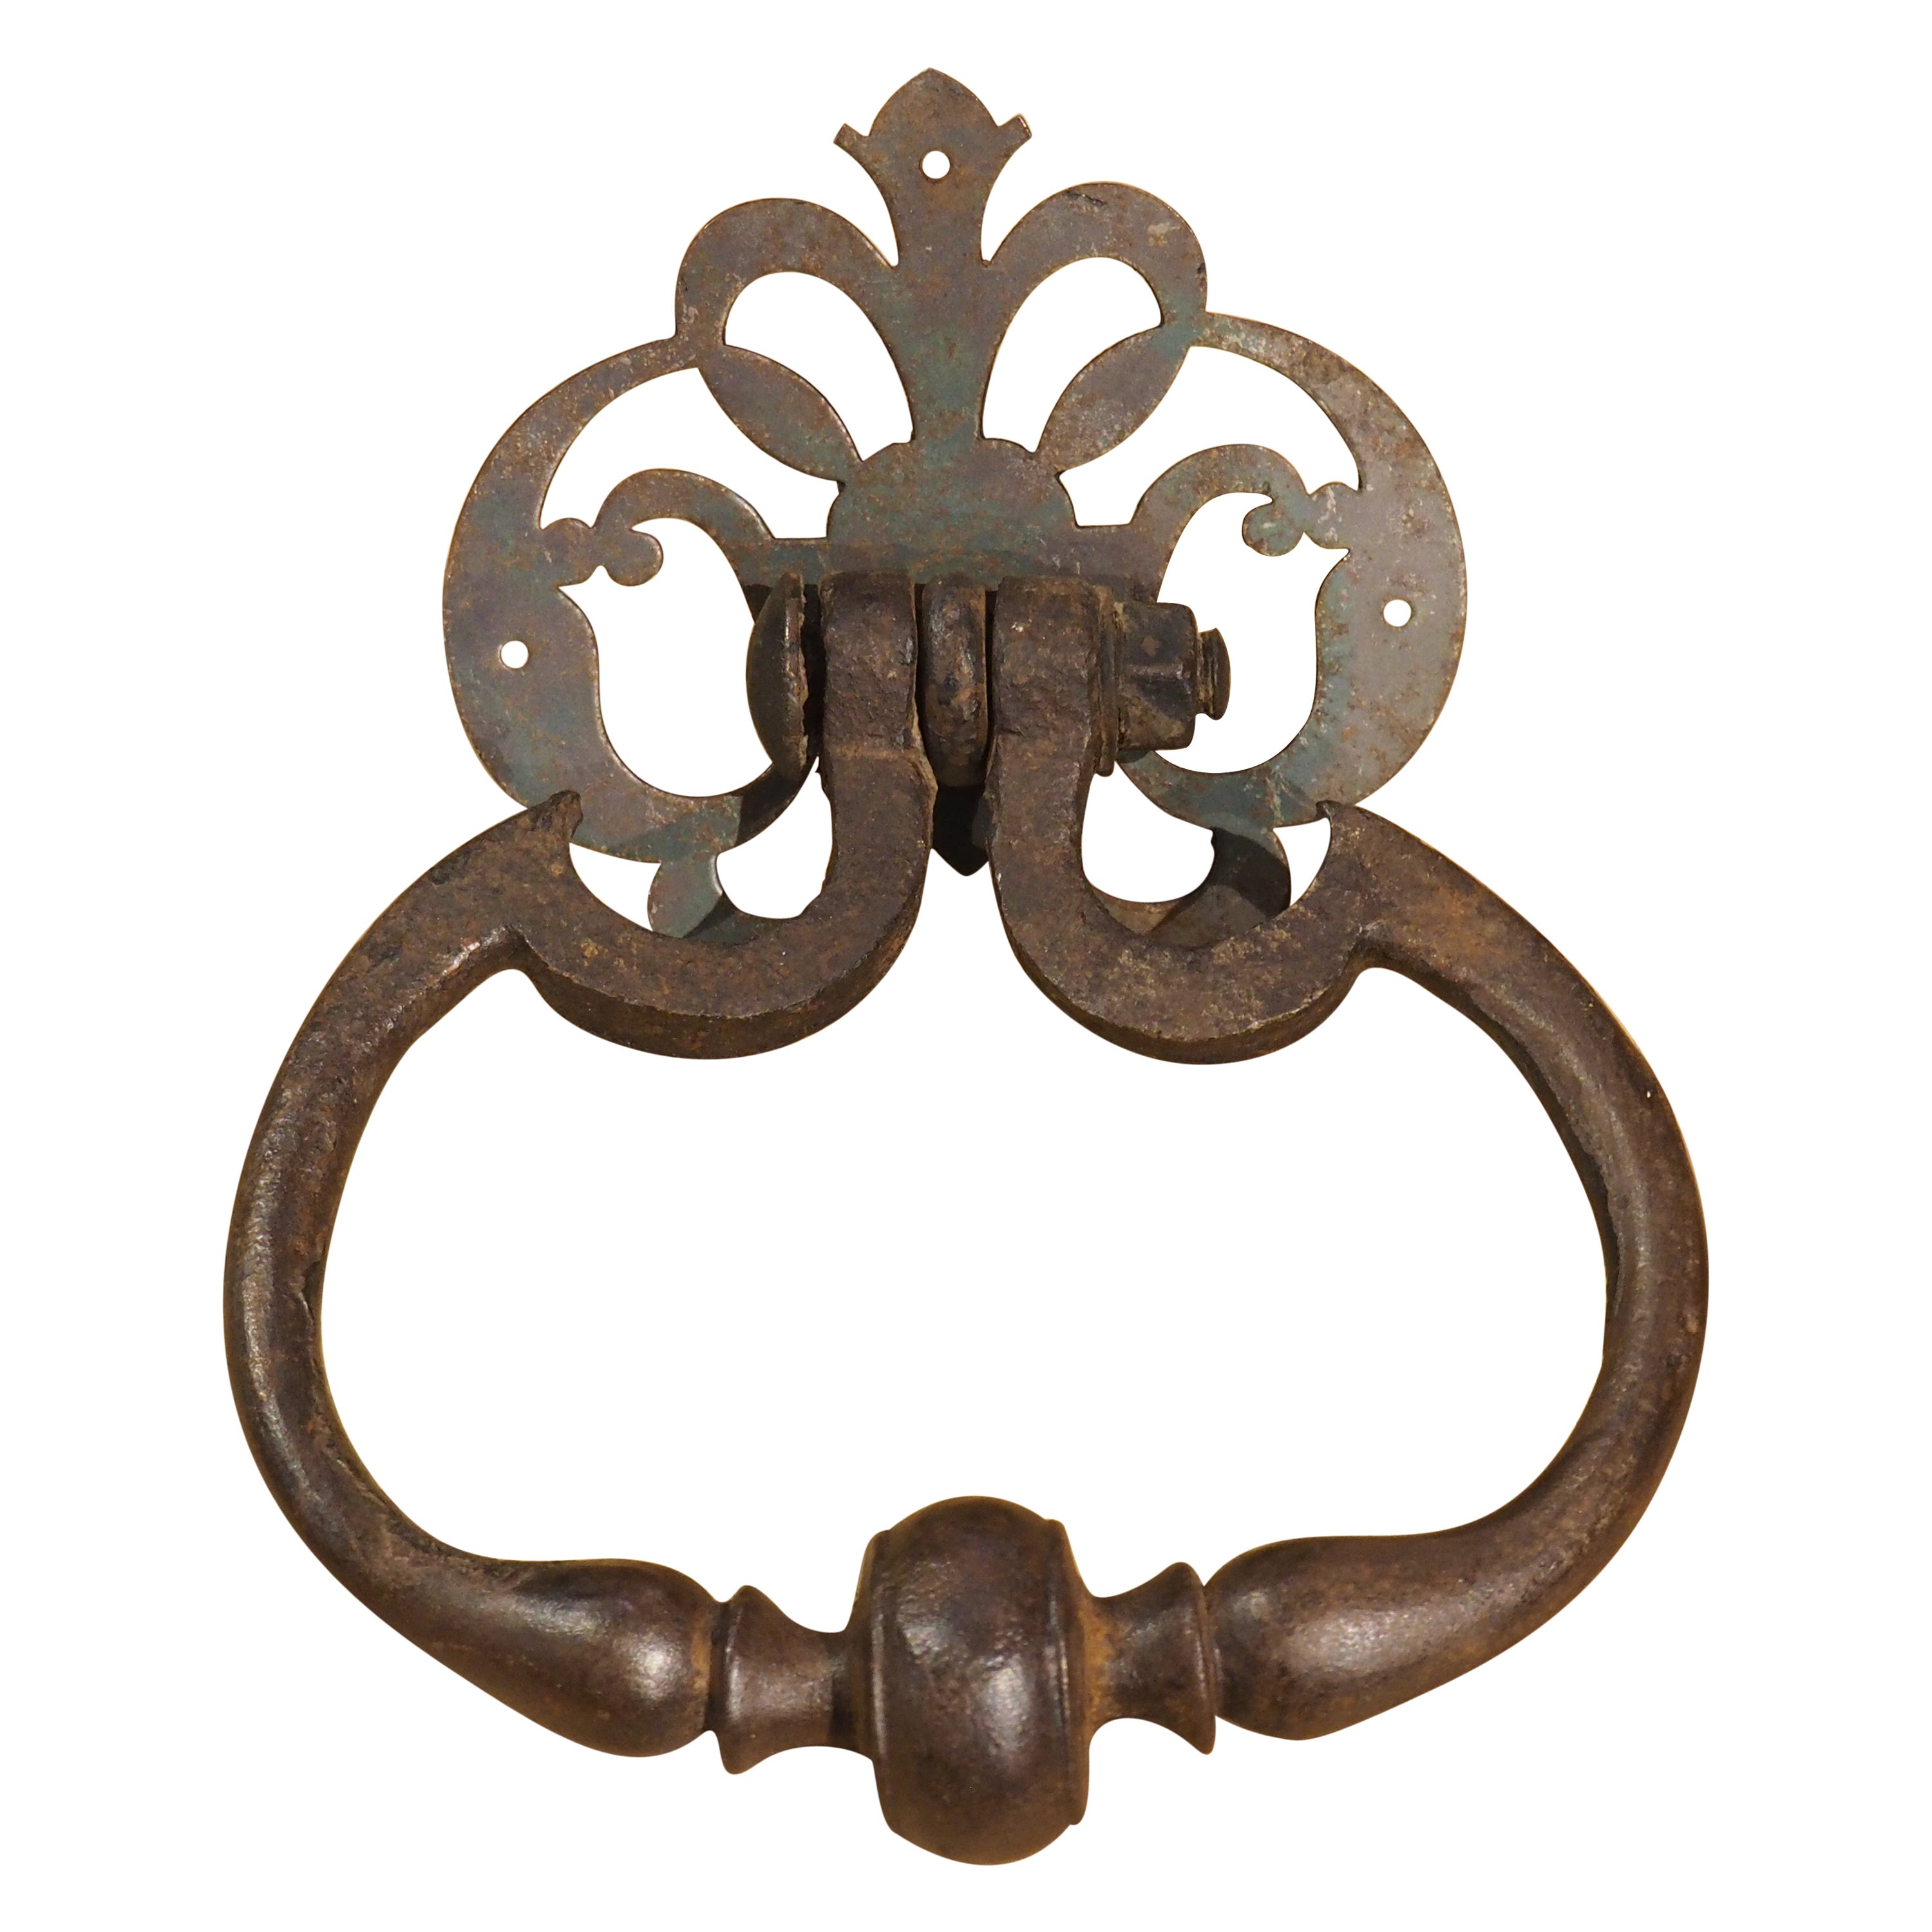 Antique Wrought Iron Door Knocker from France, 18th Century